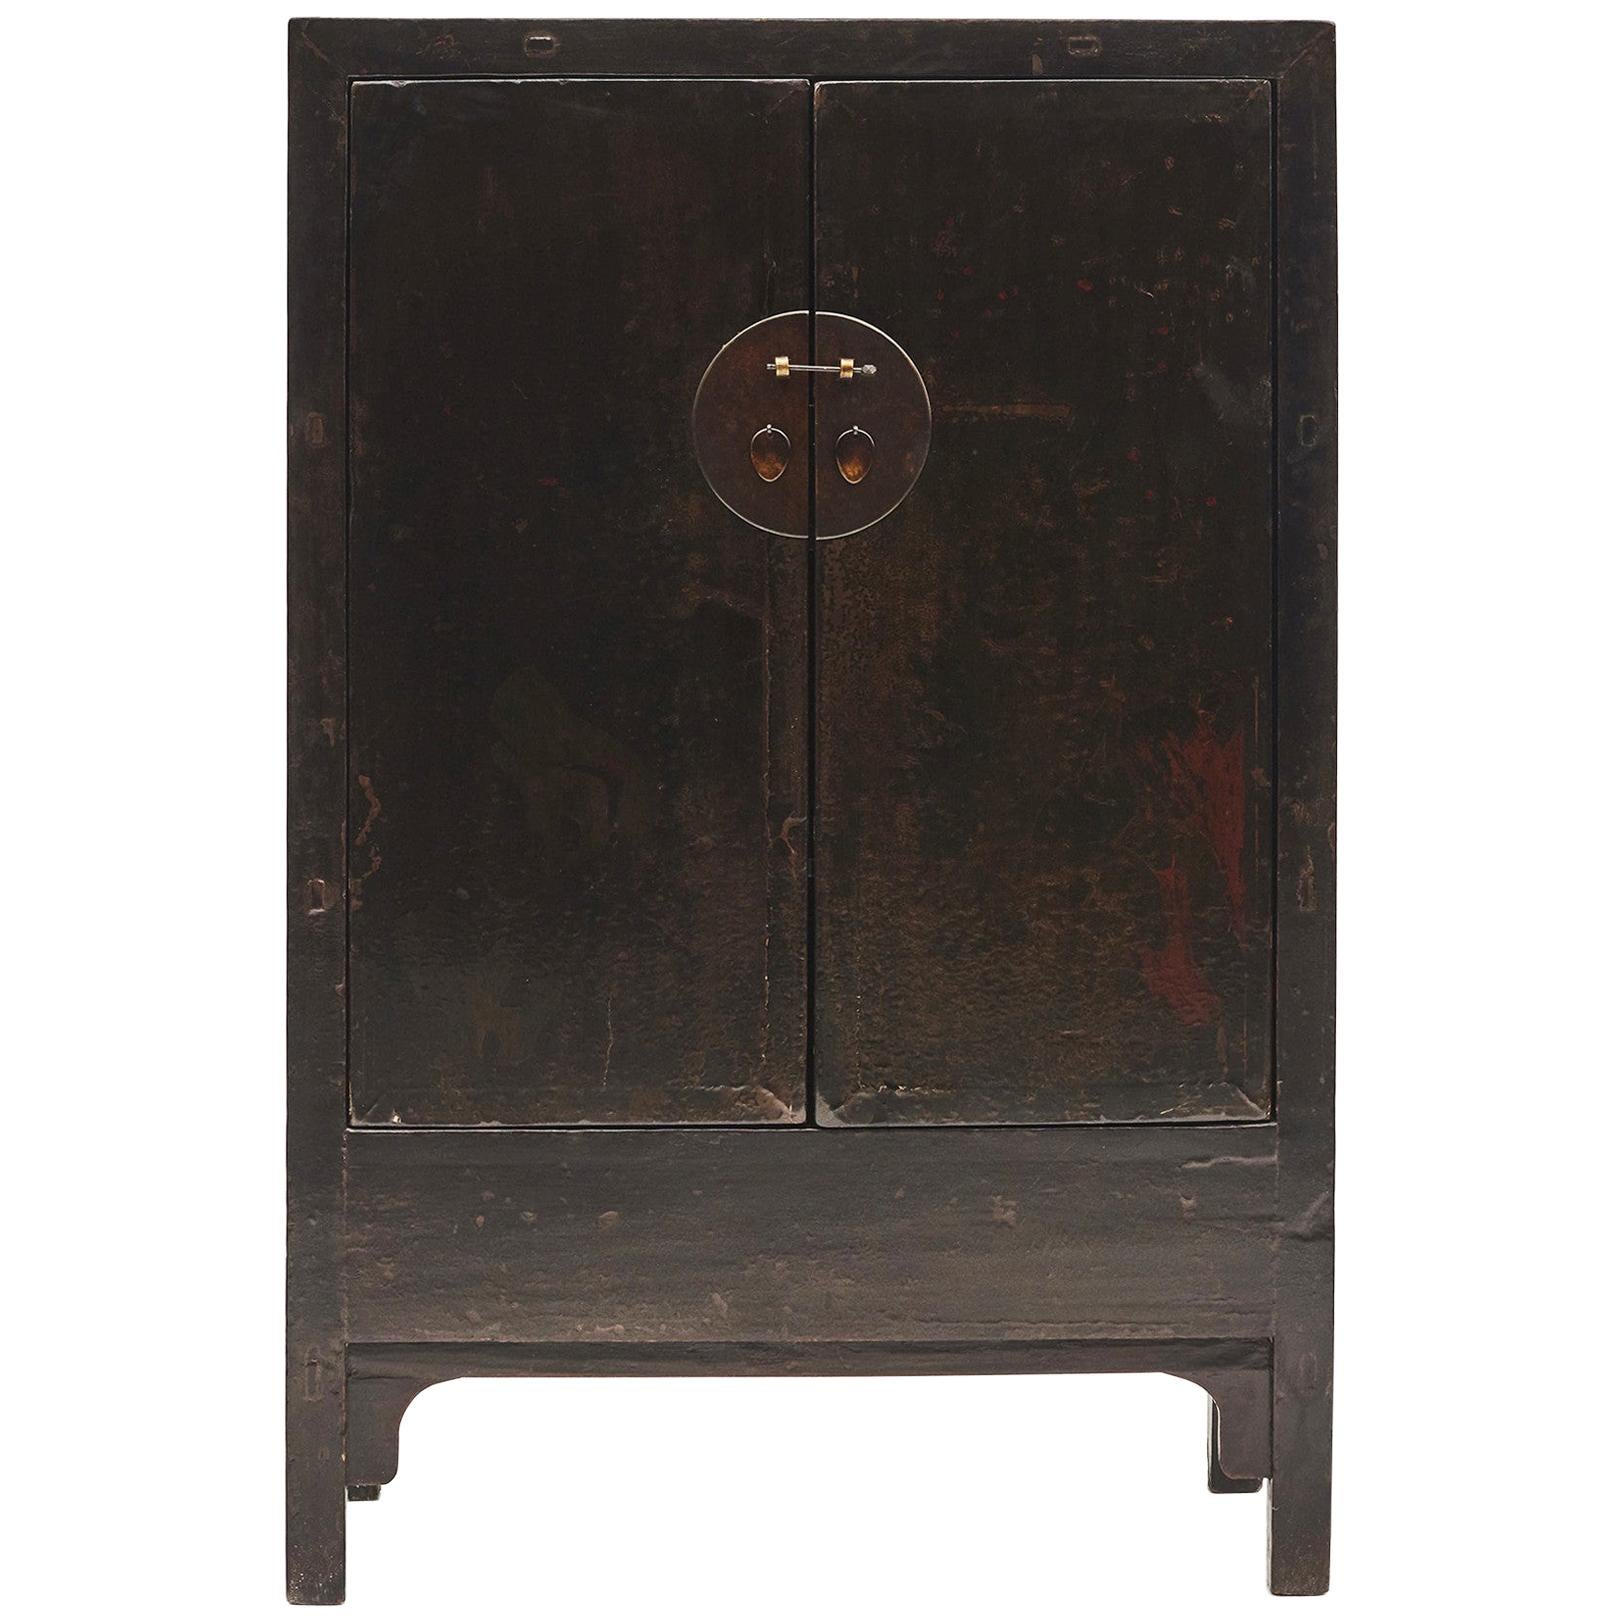 Black/Brown Chinese Qing Dynasty Period Cabinet from Shanxi, 1800-1820